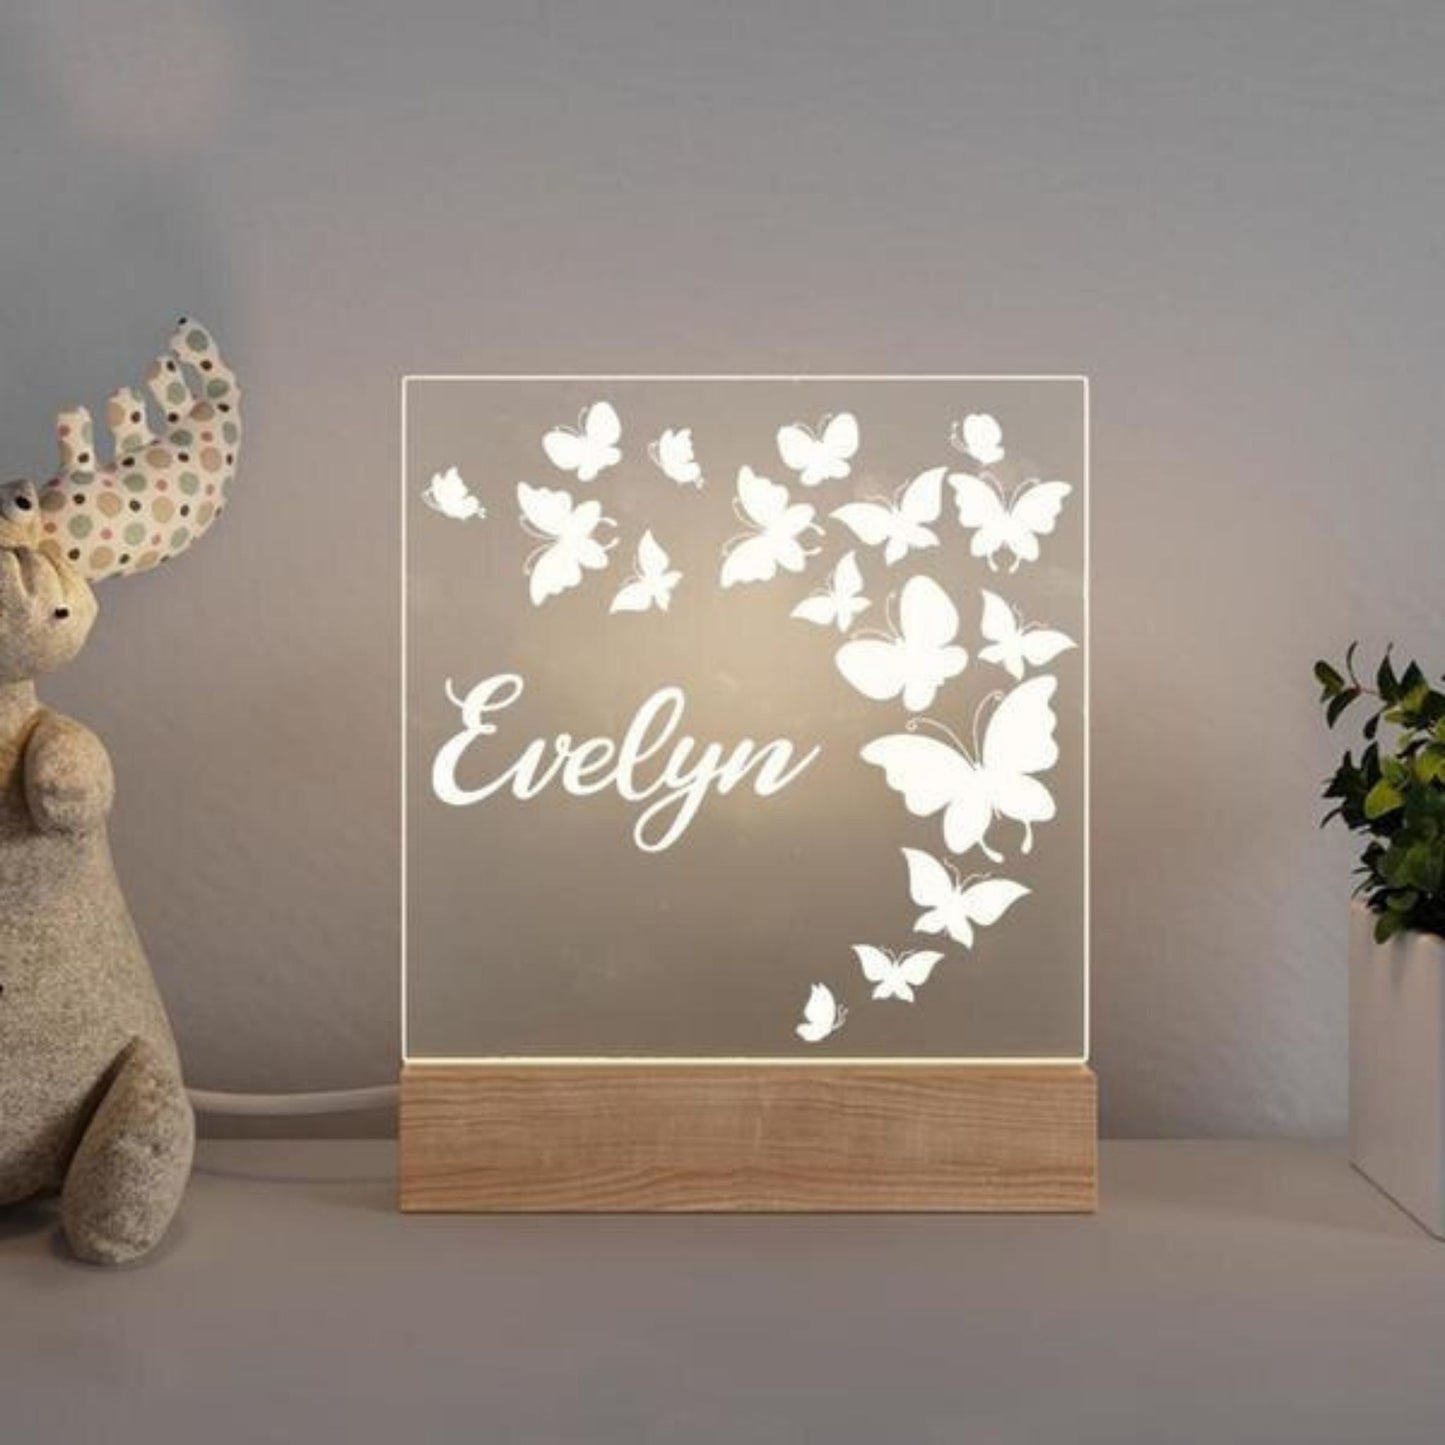 customizable night light for kids with name | butterflies personalized night light | Hunny Bubba Kids